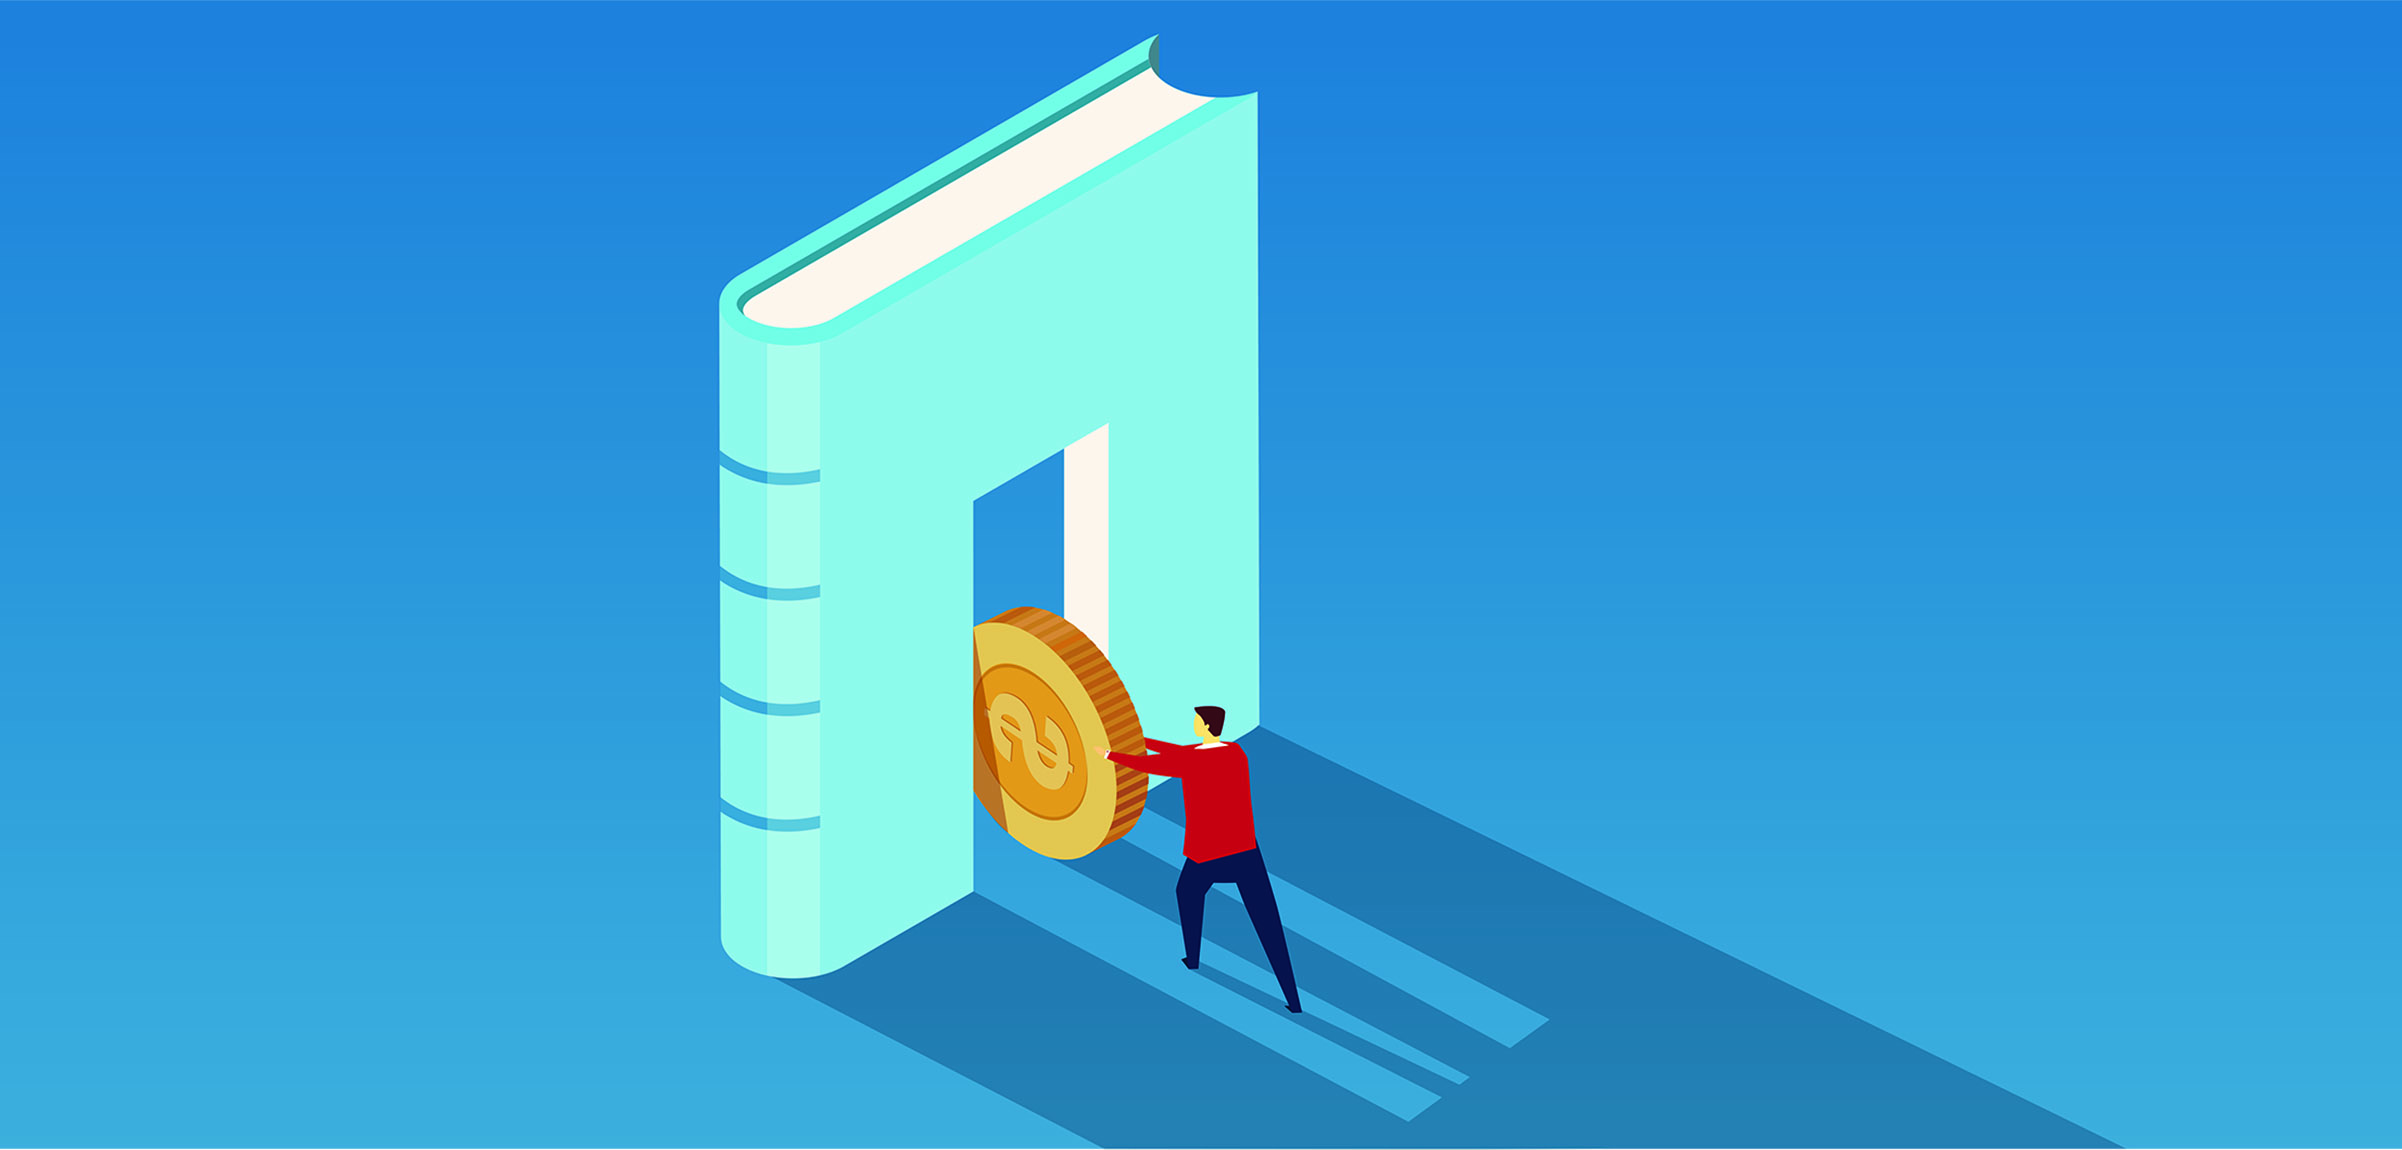 Illustration of a person pushing a coin through a standing book